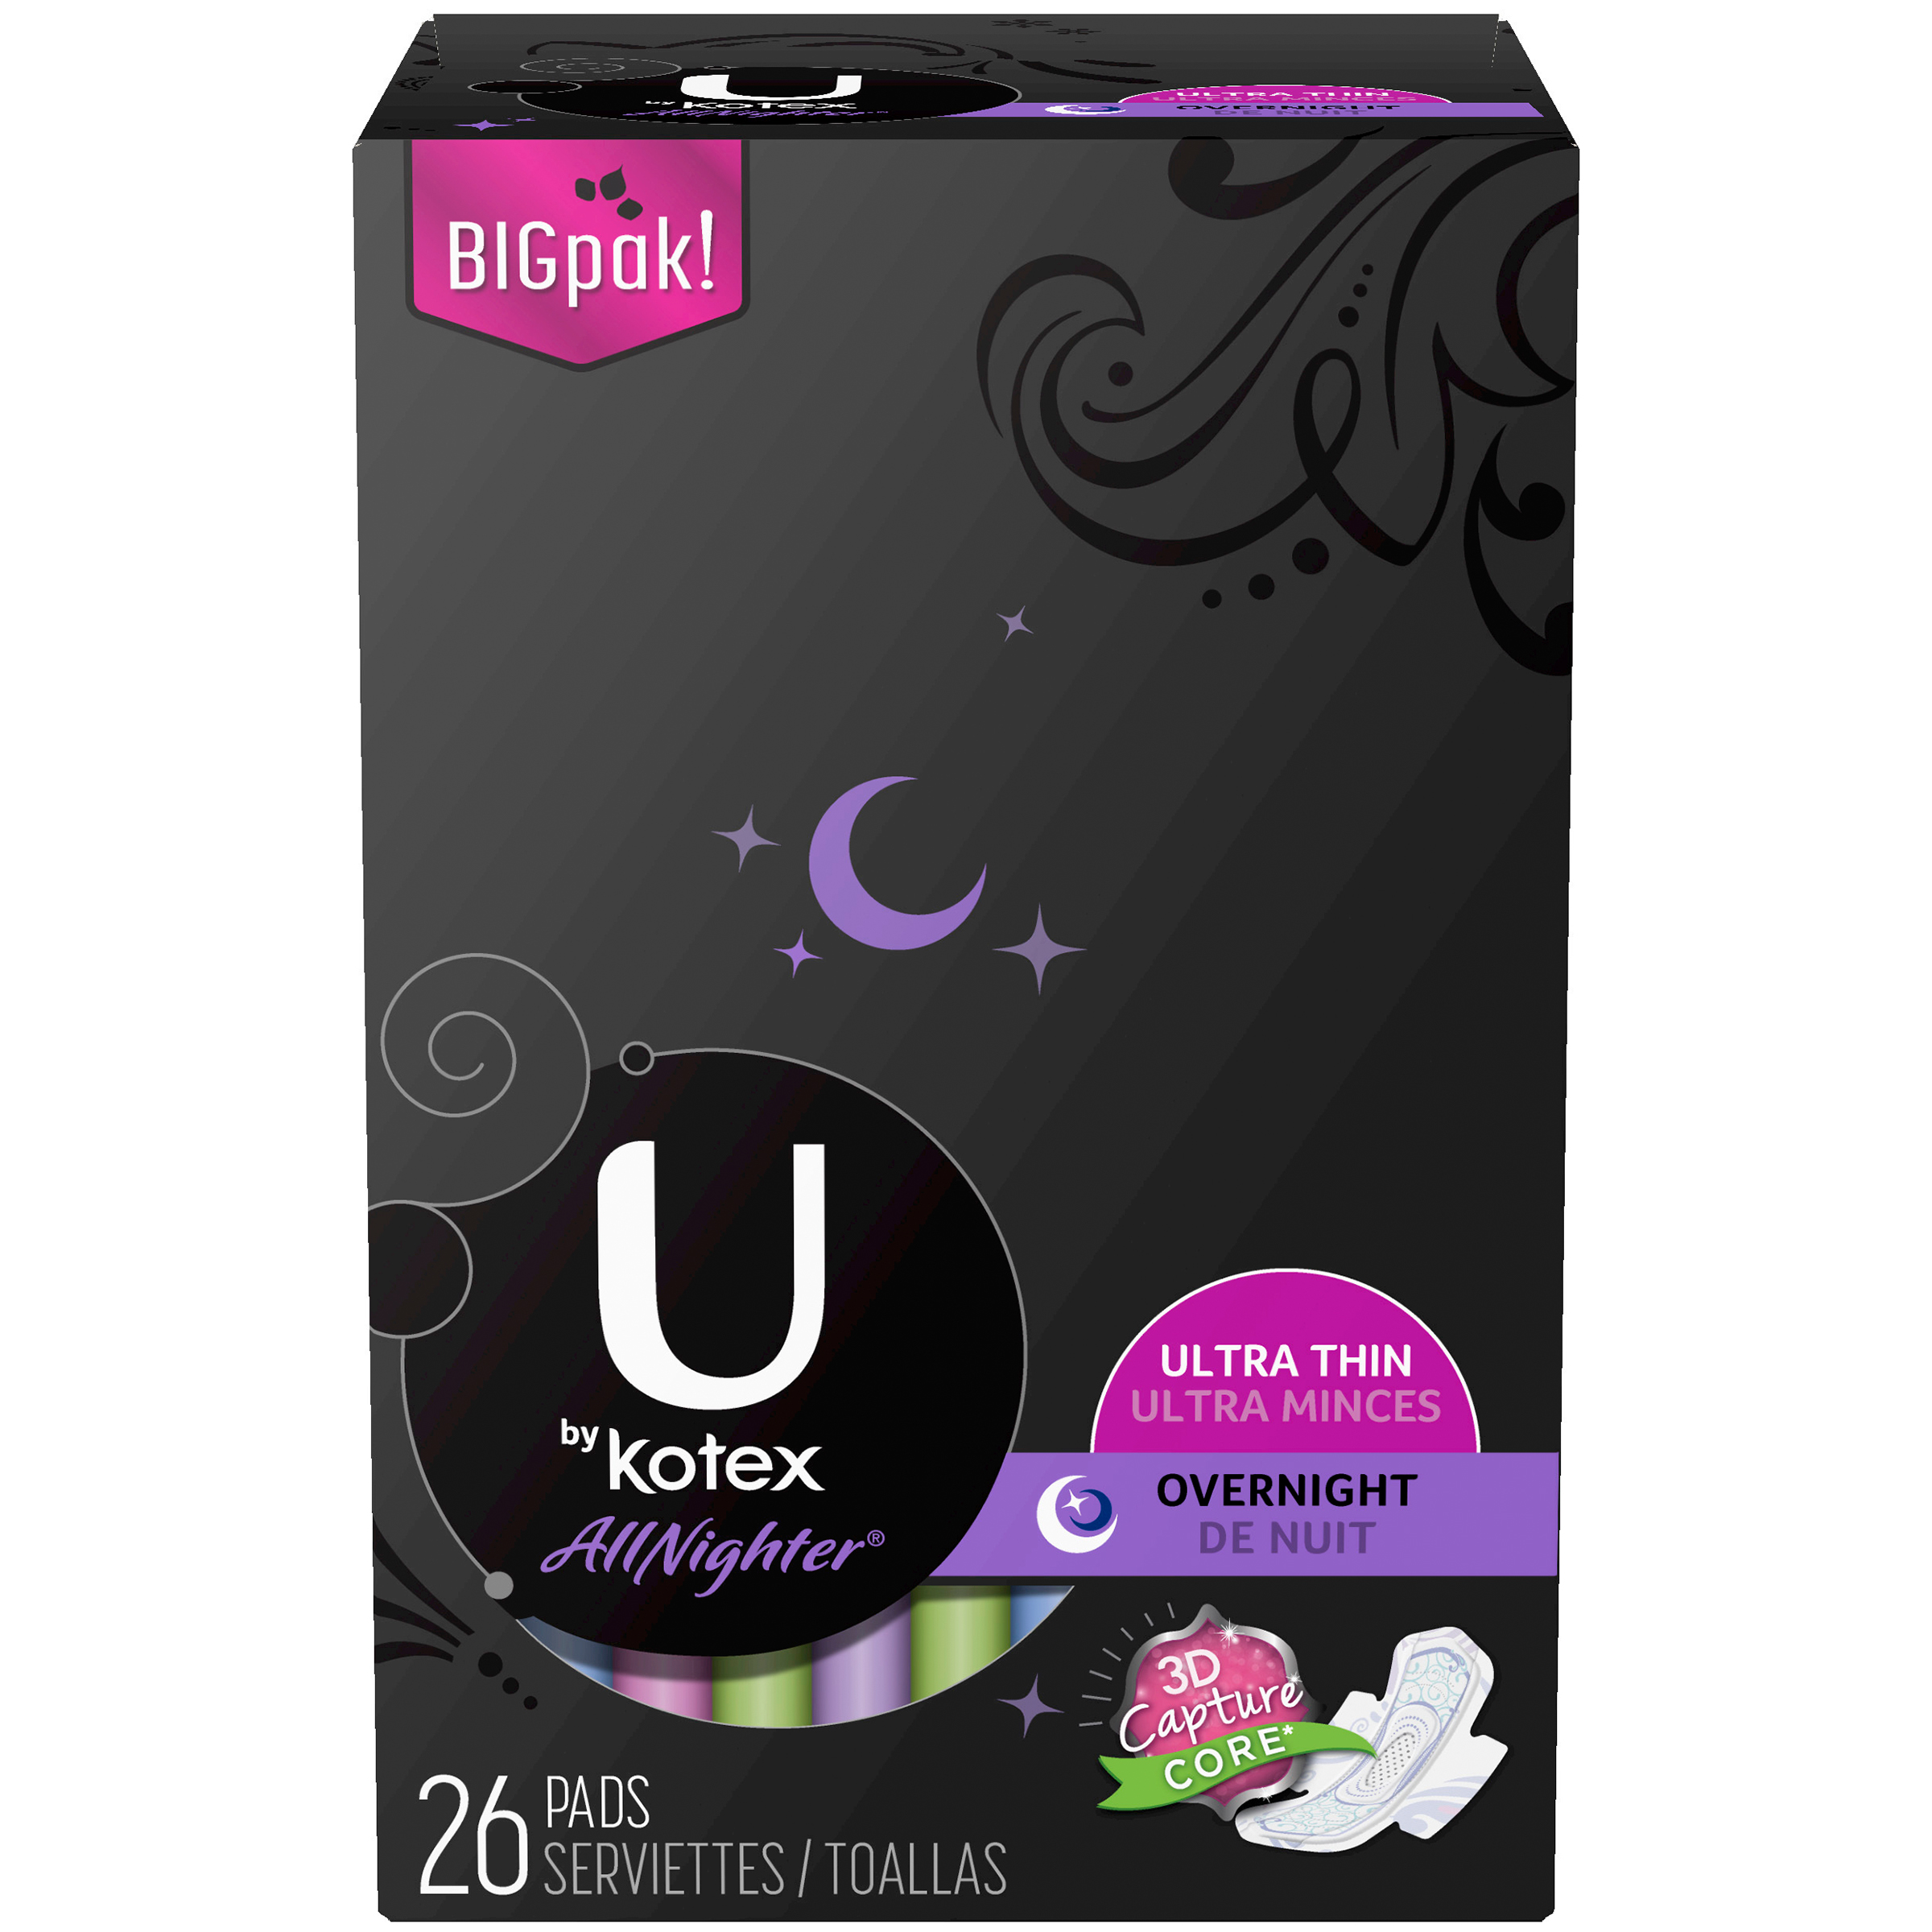 UPC 036000425444 product image for Kotex Pads 26 CT BOX - KIMBERLY-CLARK/HOUSEHOLD PRODUCTS DIV. | upcitemdb.com